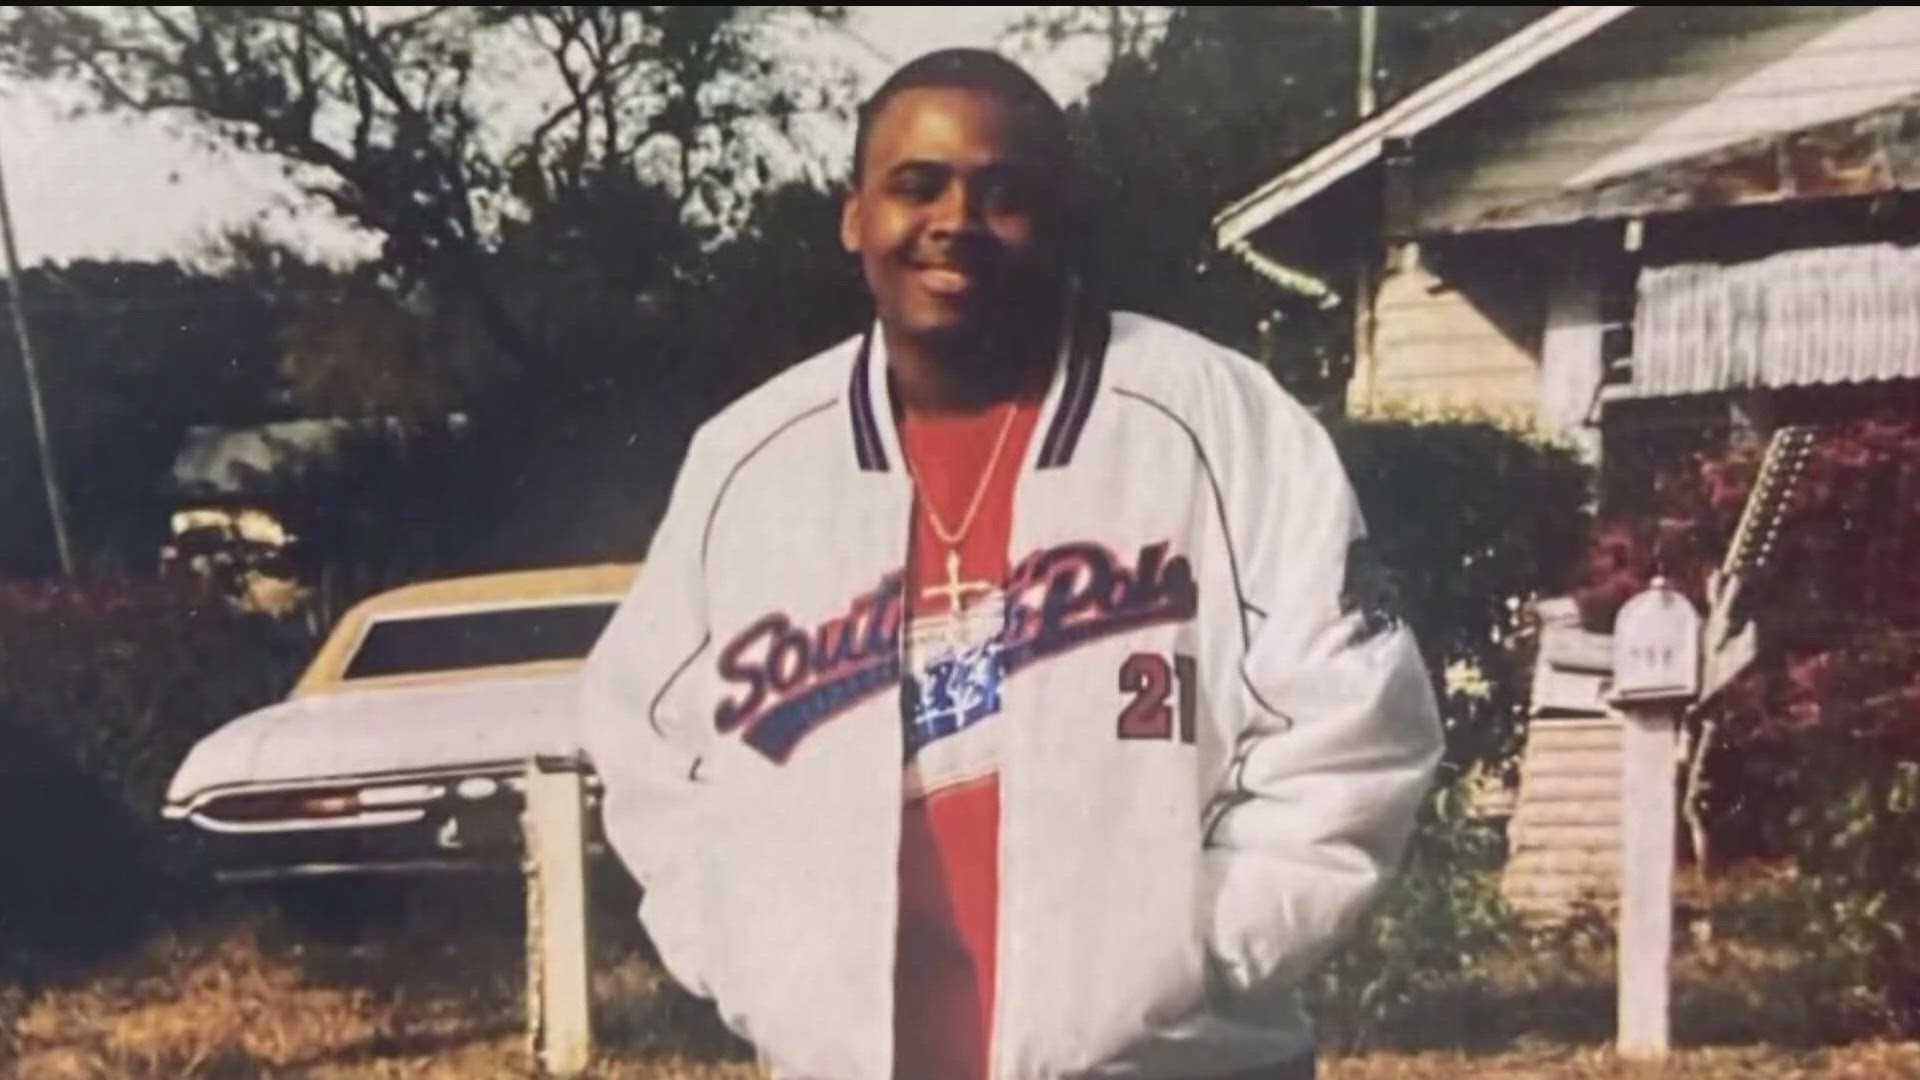 Lashawn Thompson died last September while in custody at the Fulton County jail.